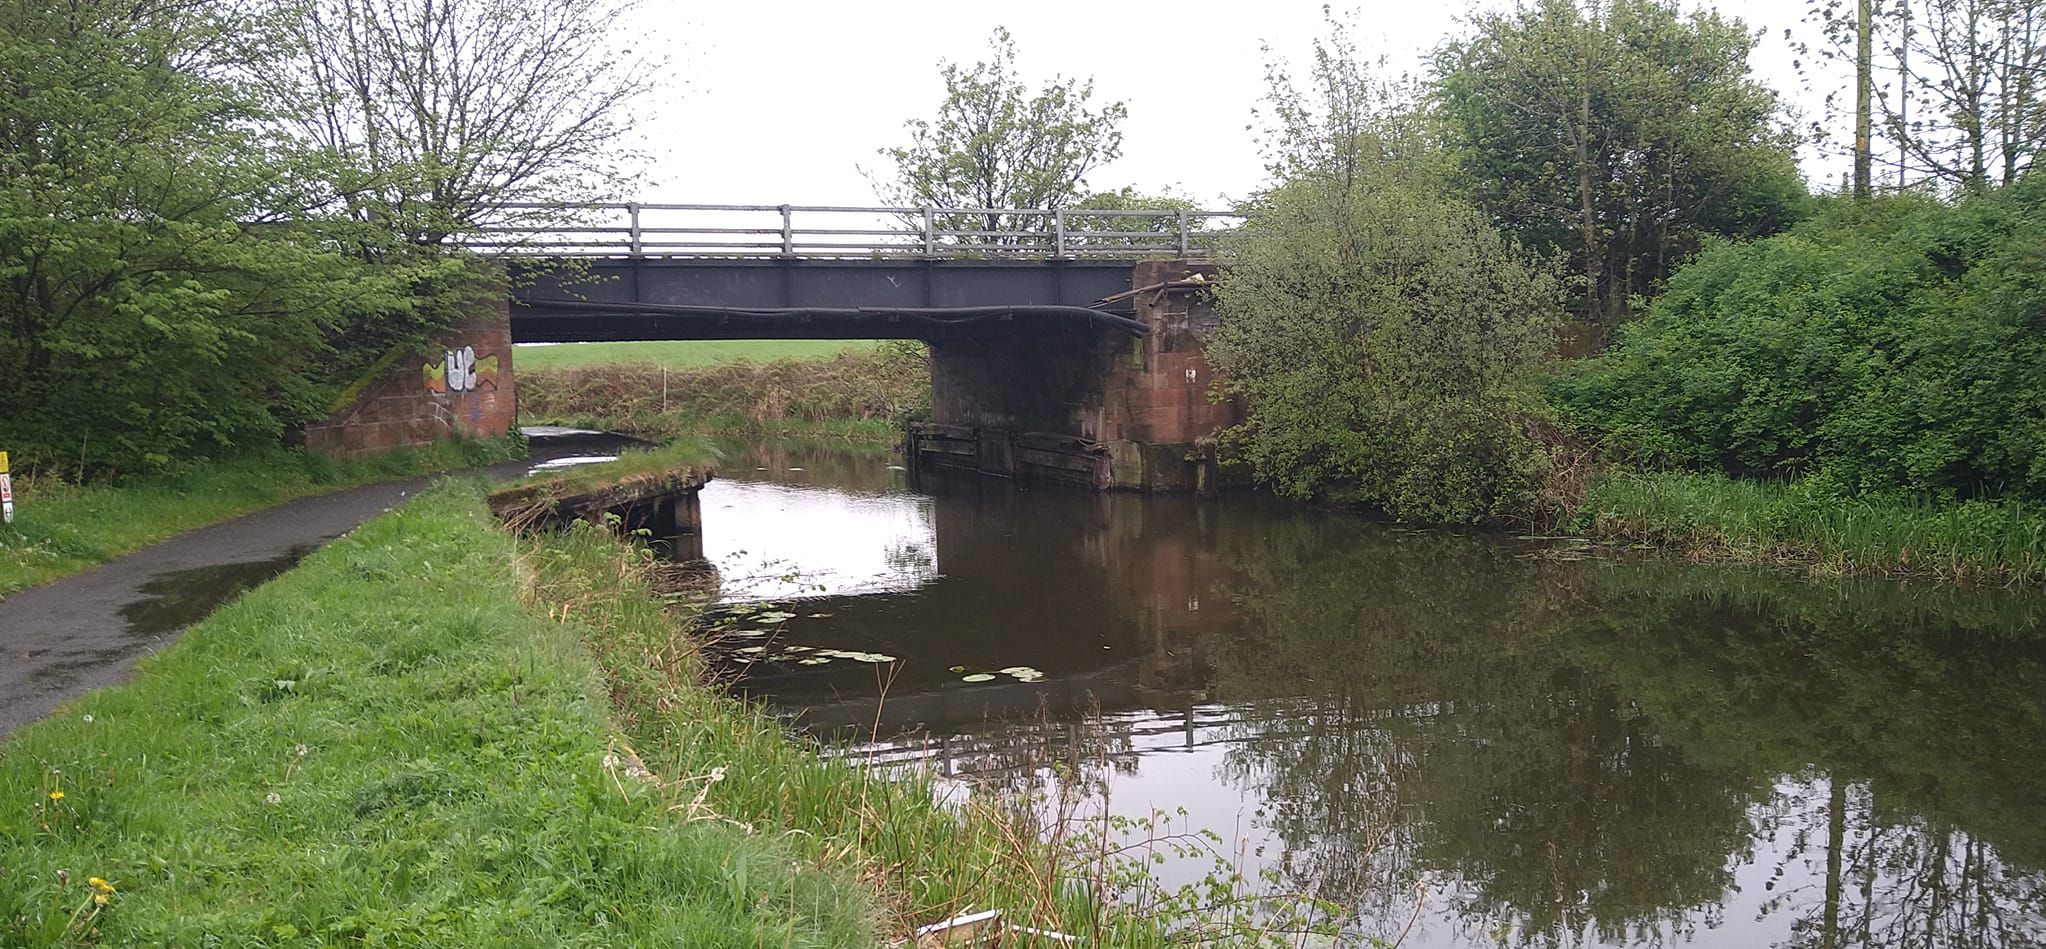 Bridge over the Forth & Clyde Canal